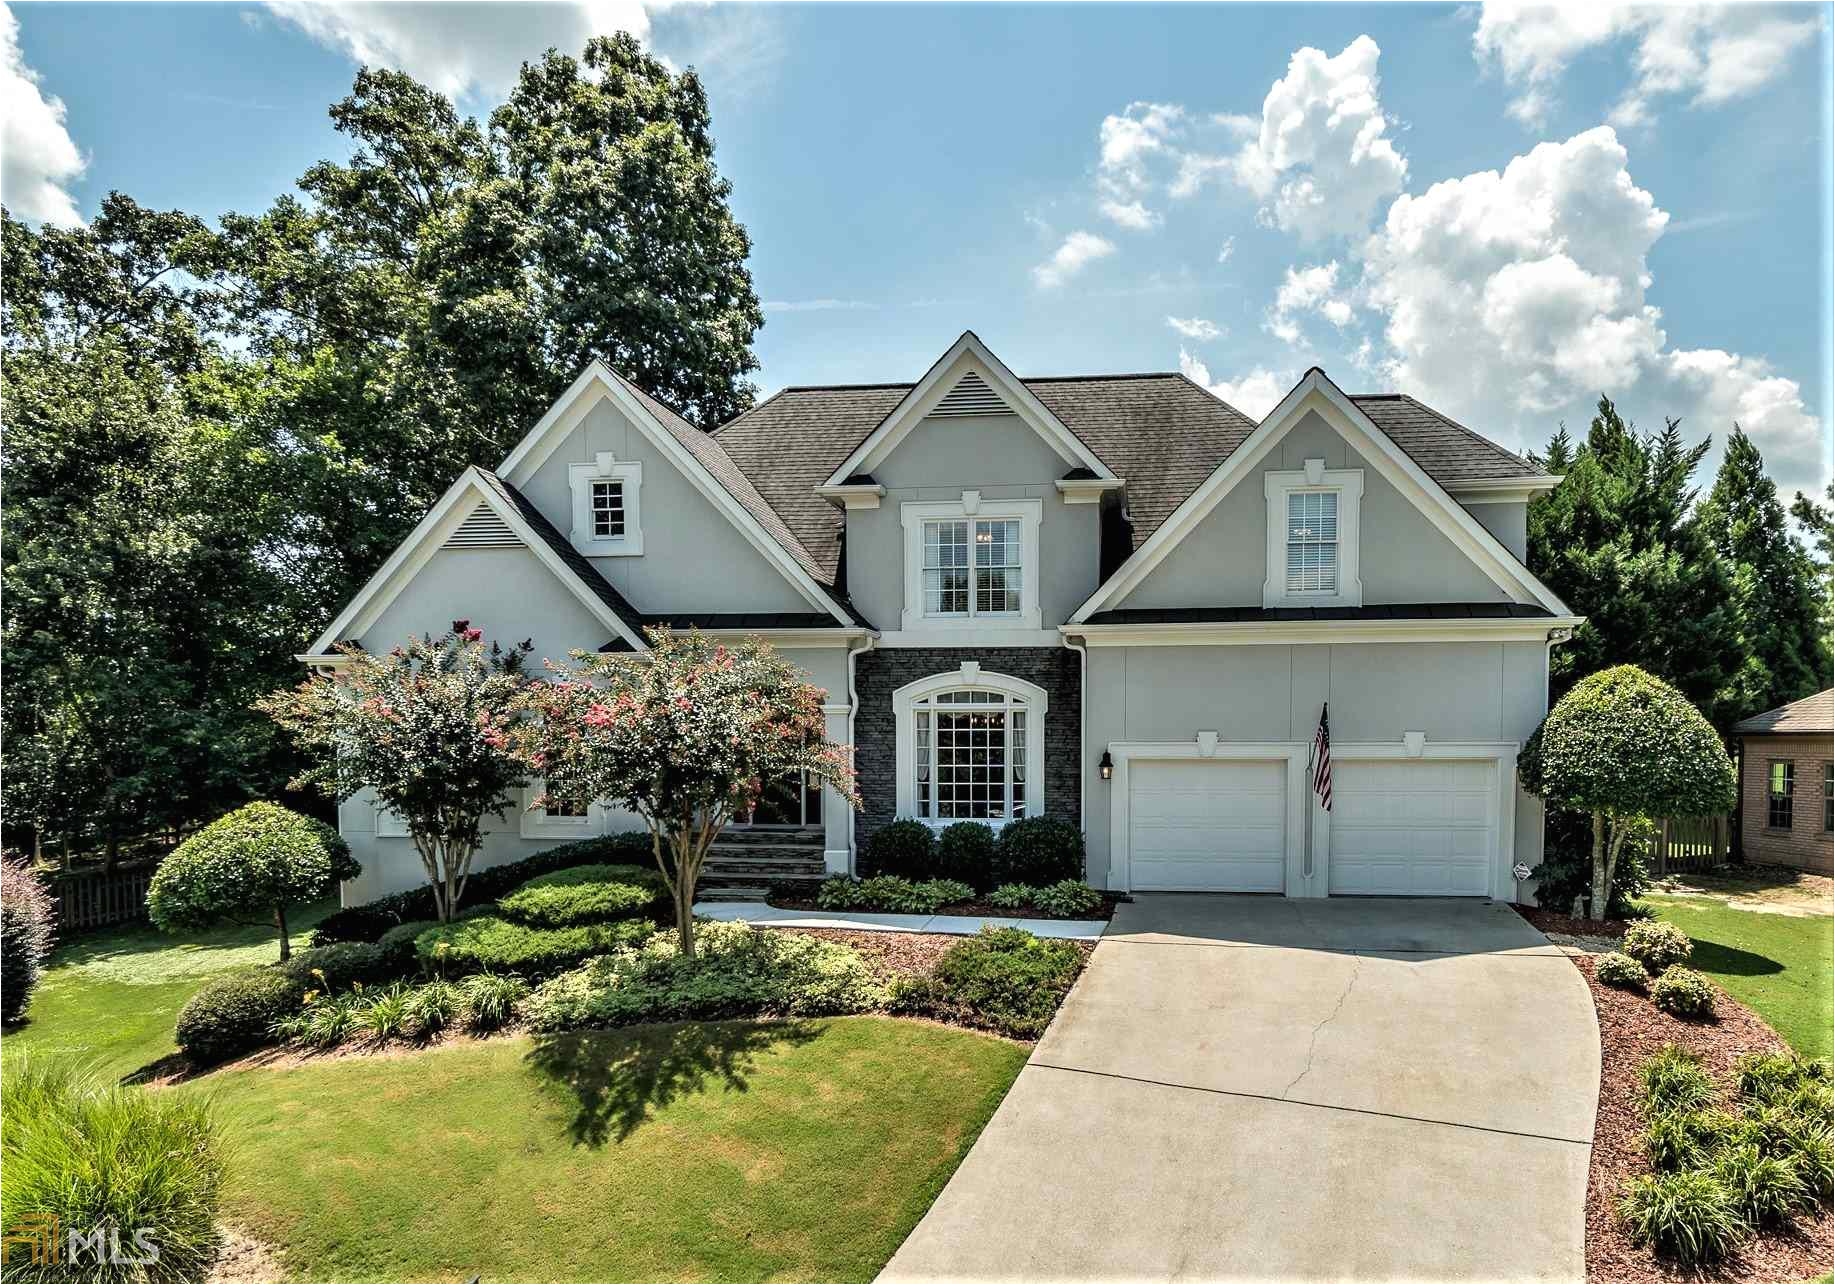 for sale 464900 3312 forest heights ct dacula